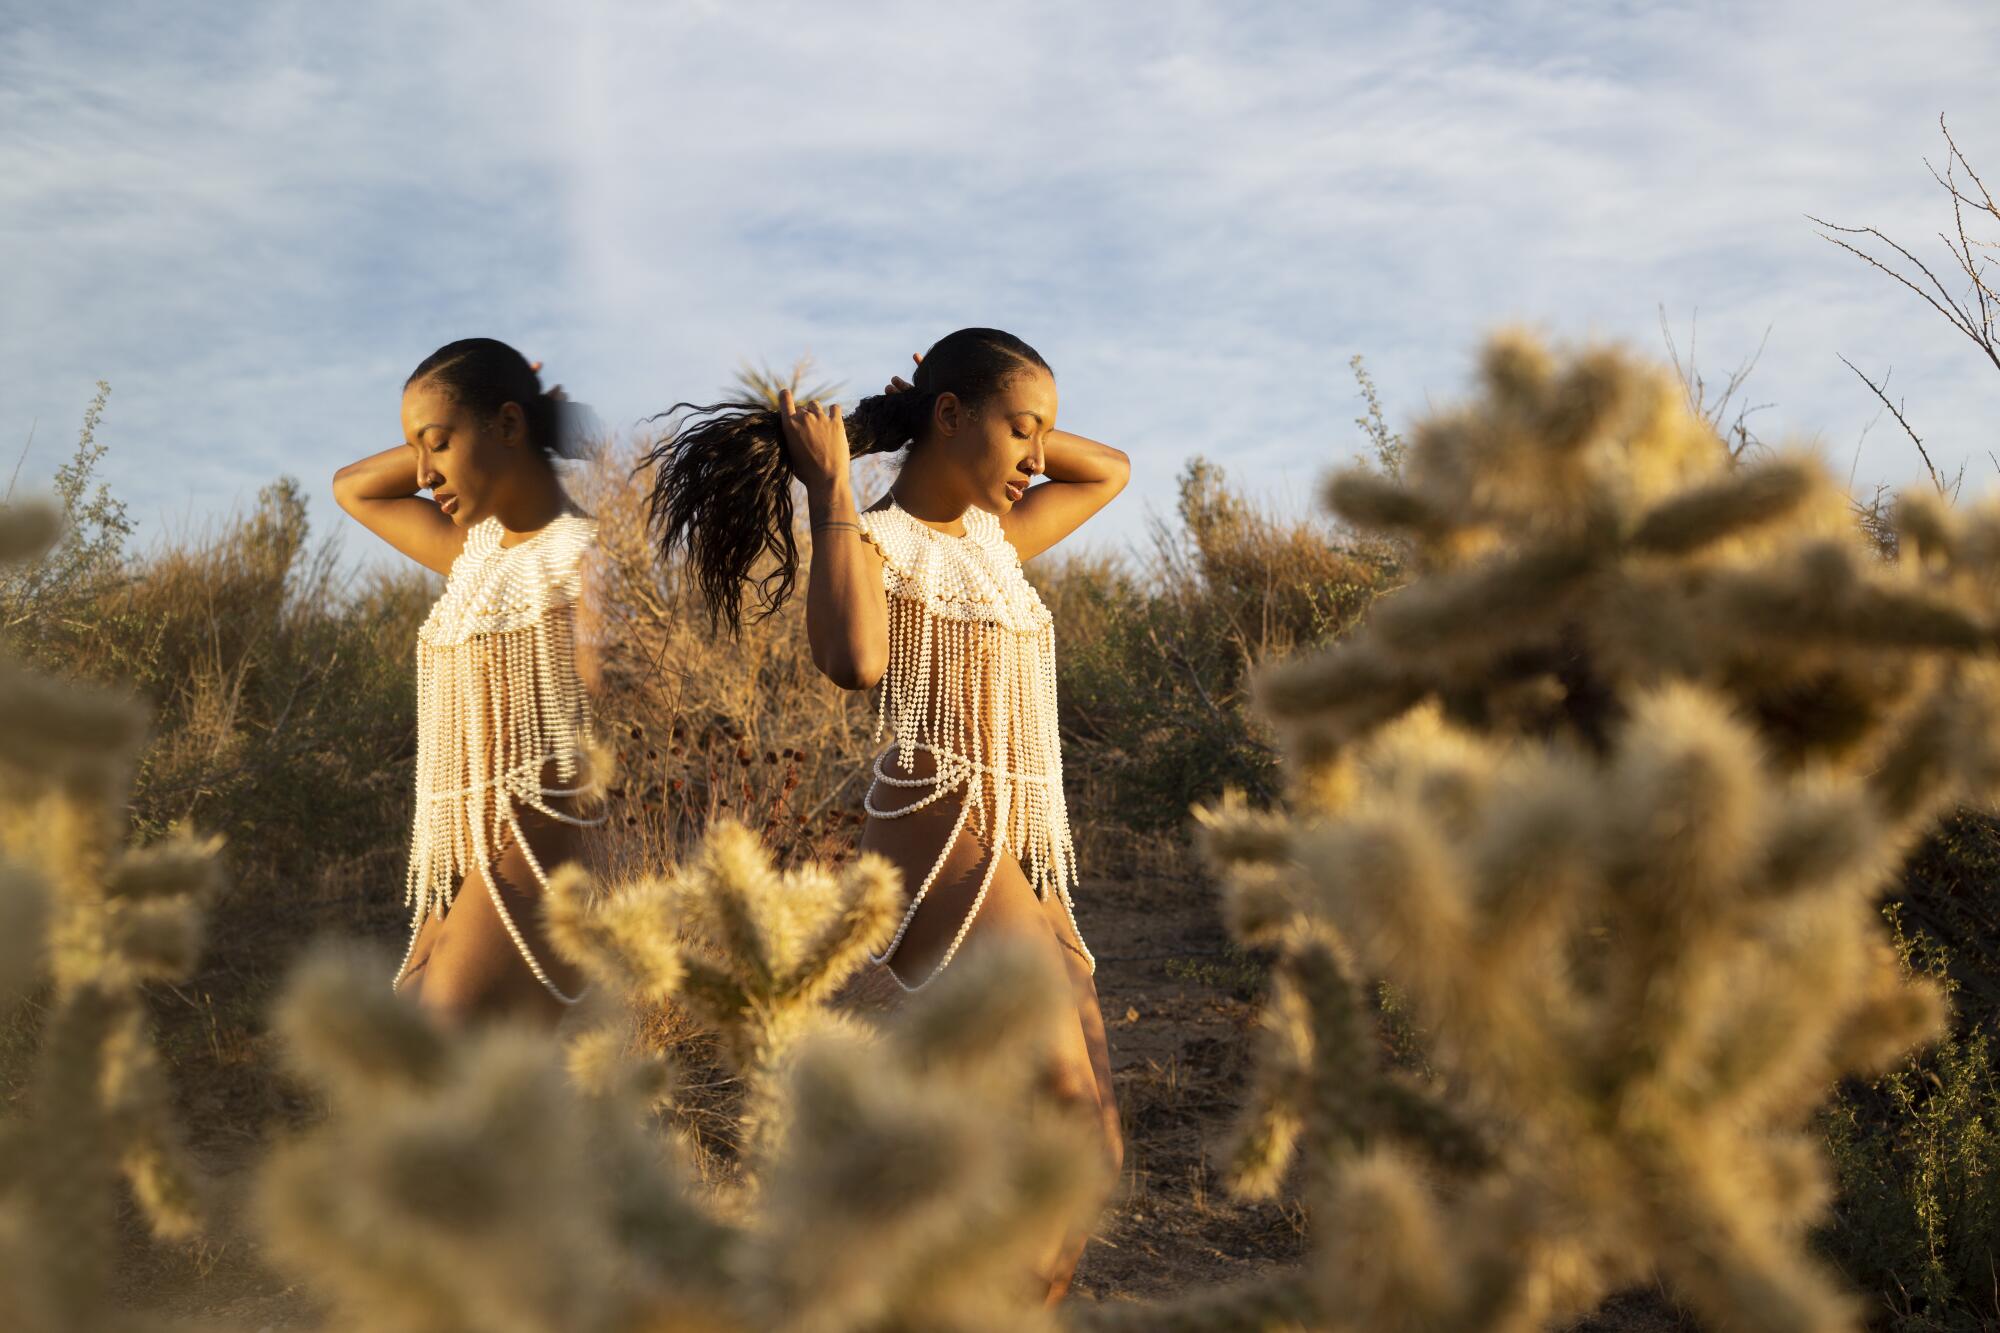 Back-to-back images of a woman surrounded by a desert landscape